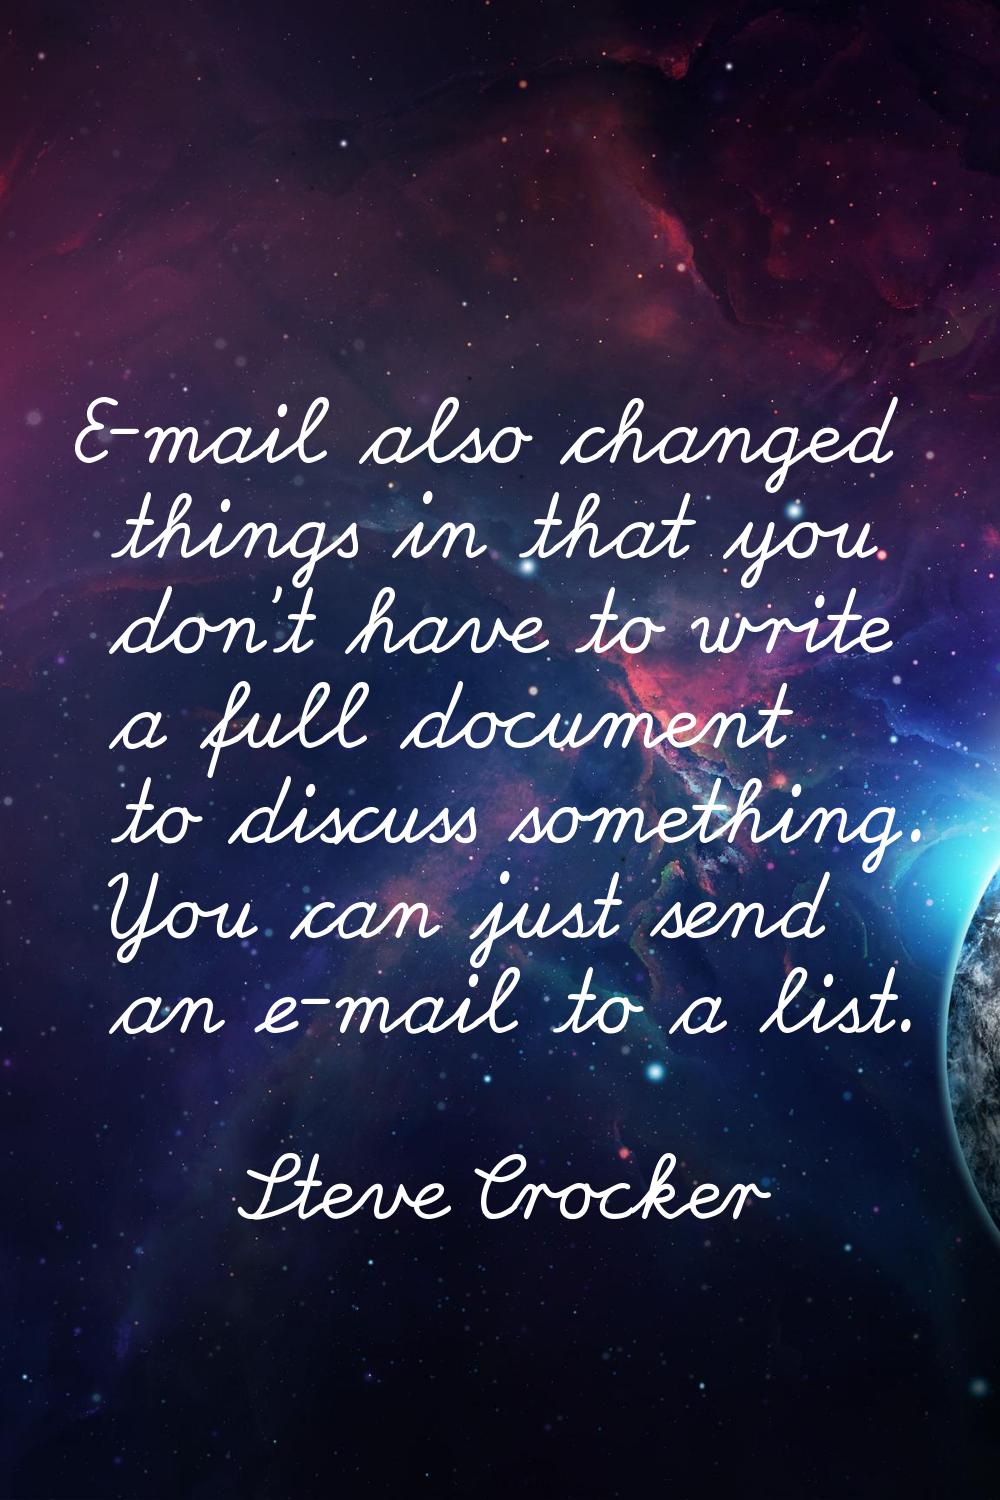 E-mail also changed things in that you don't have to write a full document to discuss something. Yo